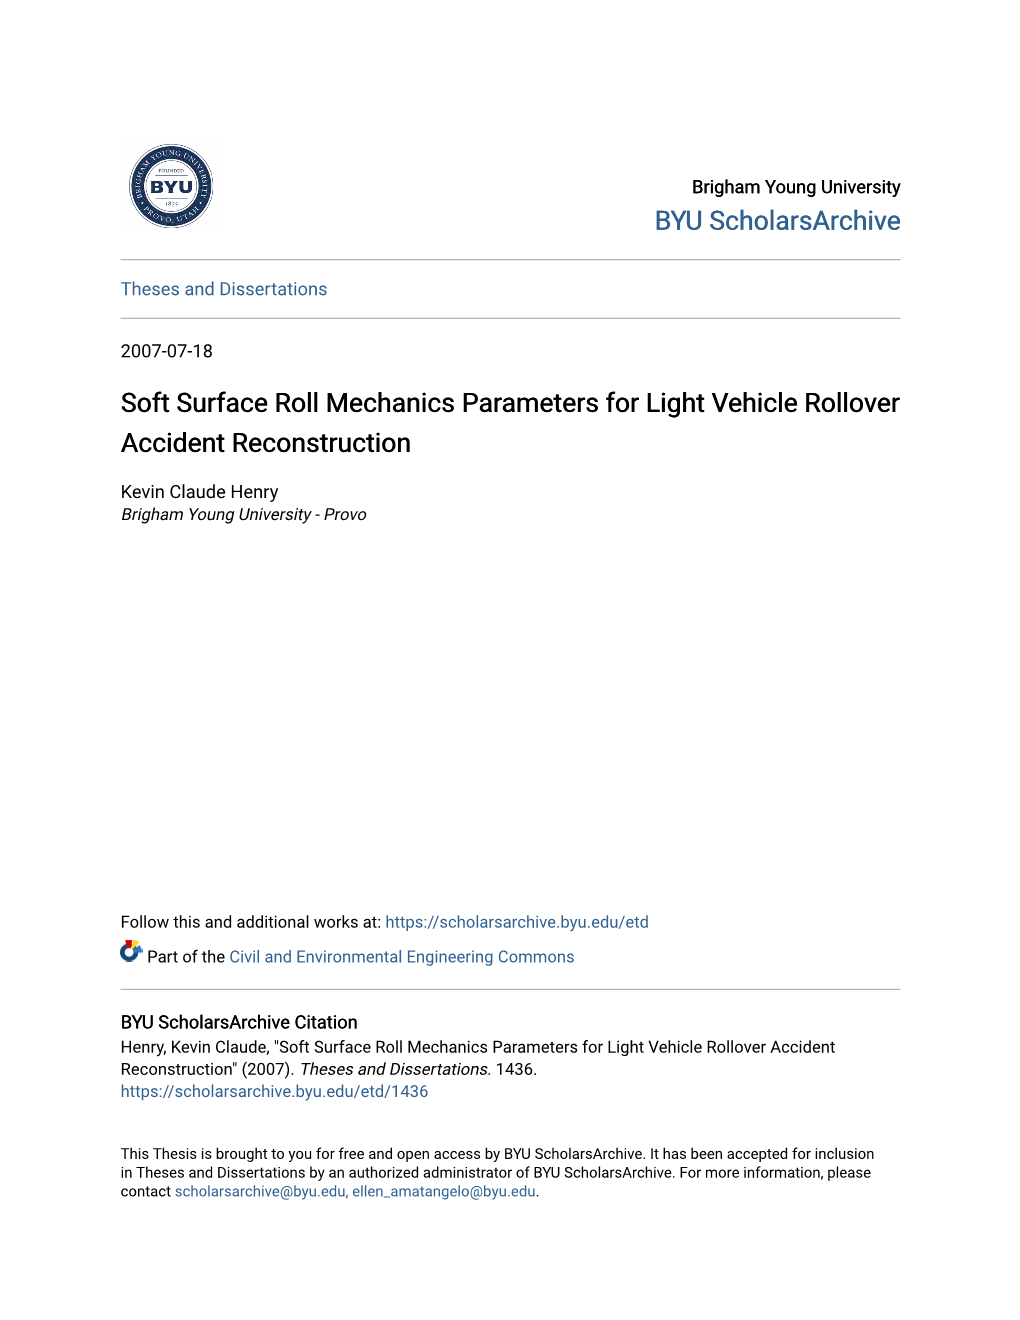 Soft Surface Roll Mechanics Parameters for Light Vehicle Rollover Accident Reconstruction